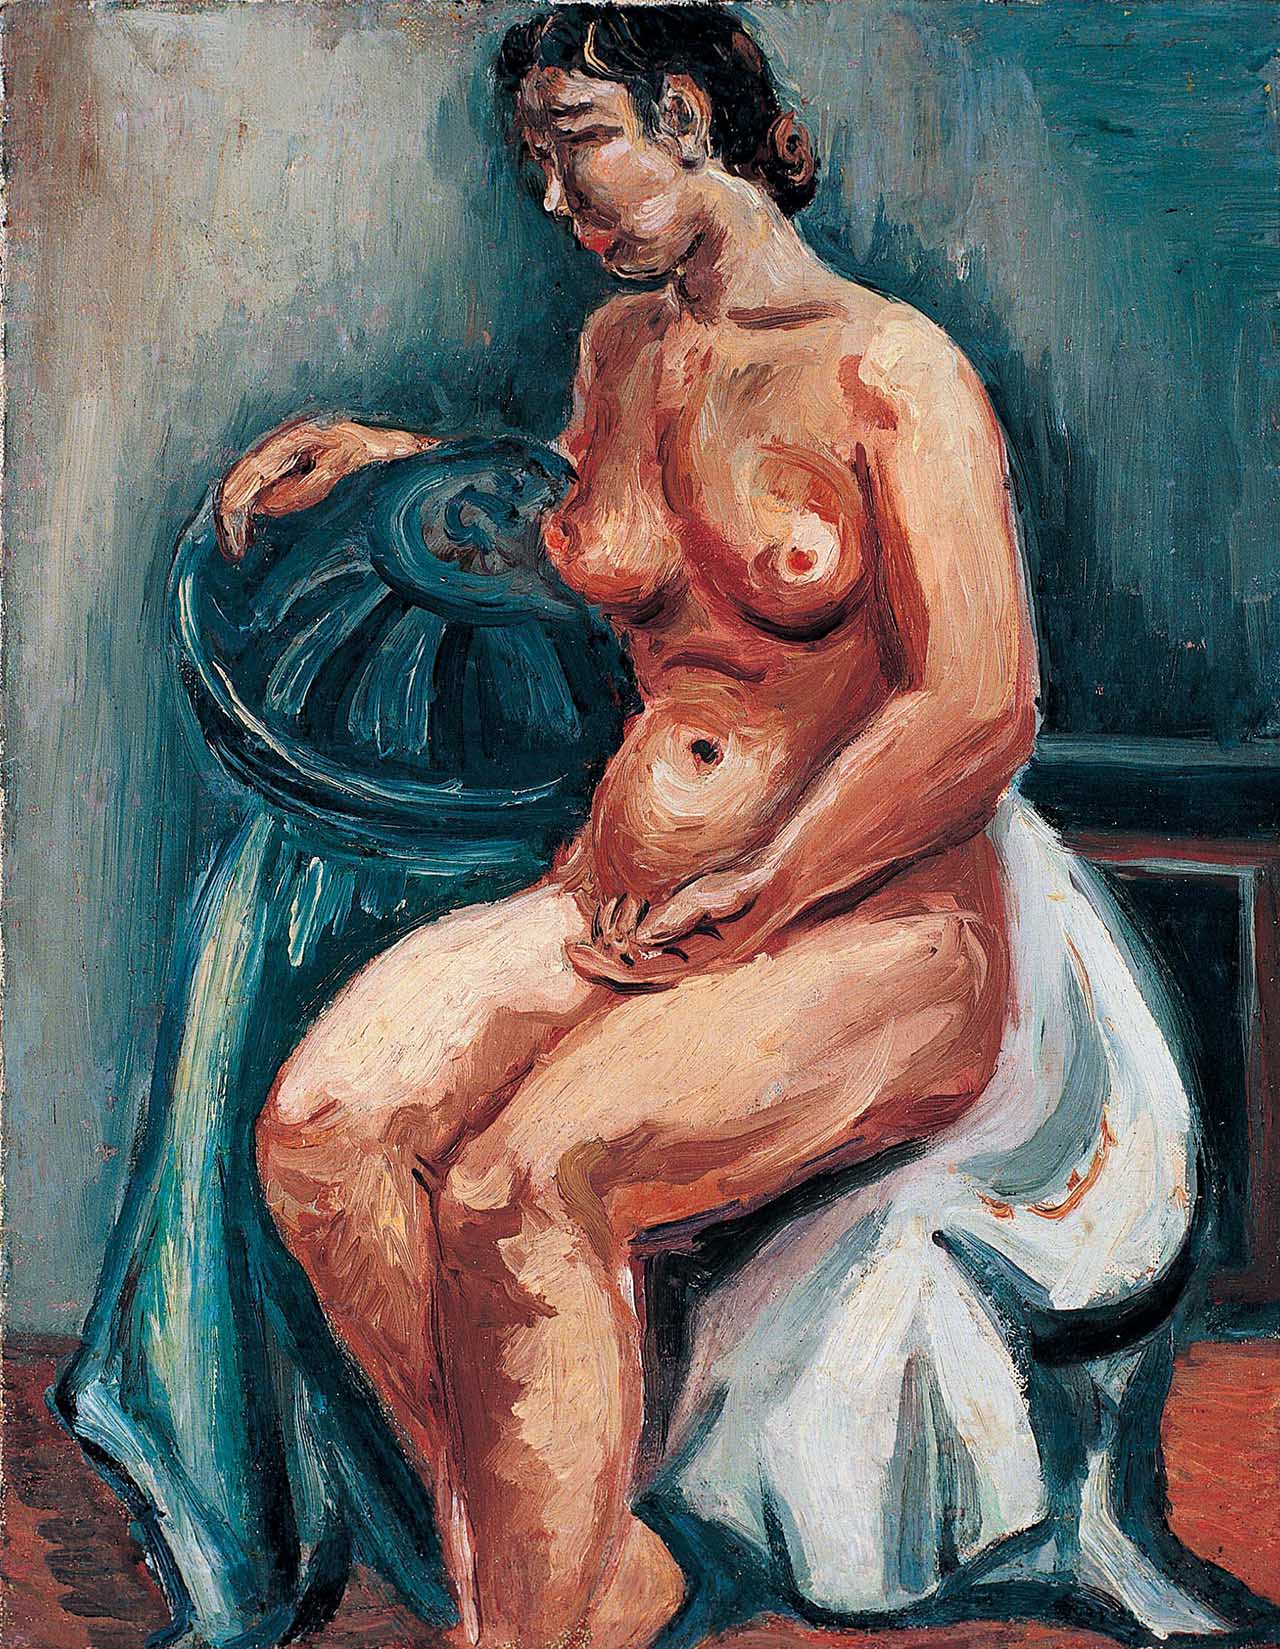 Seated Nude in Meditation Oil on canvas 41x31.5cm(6F)